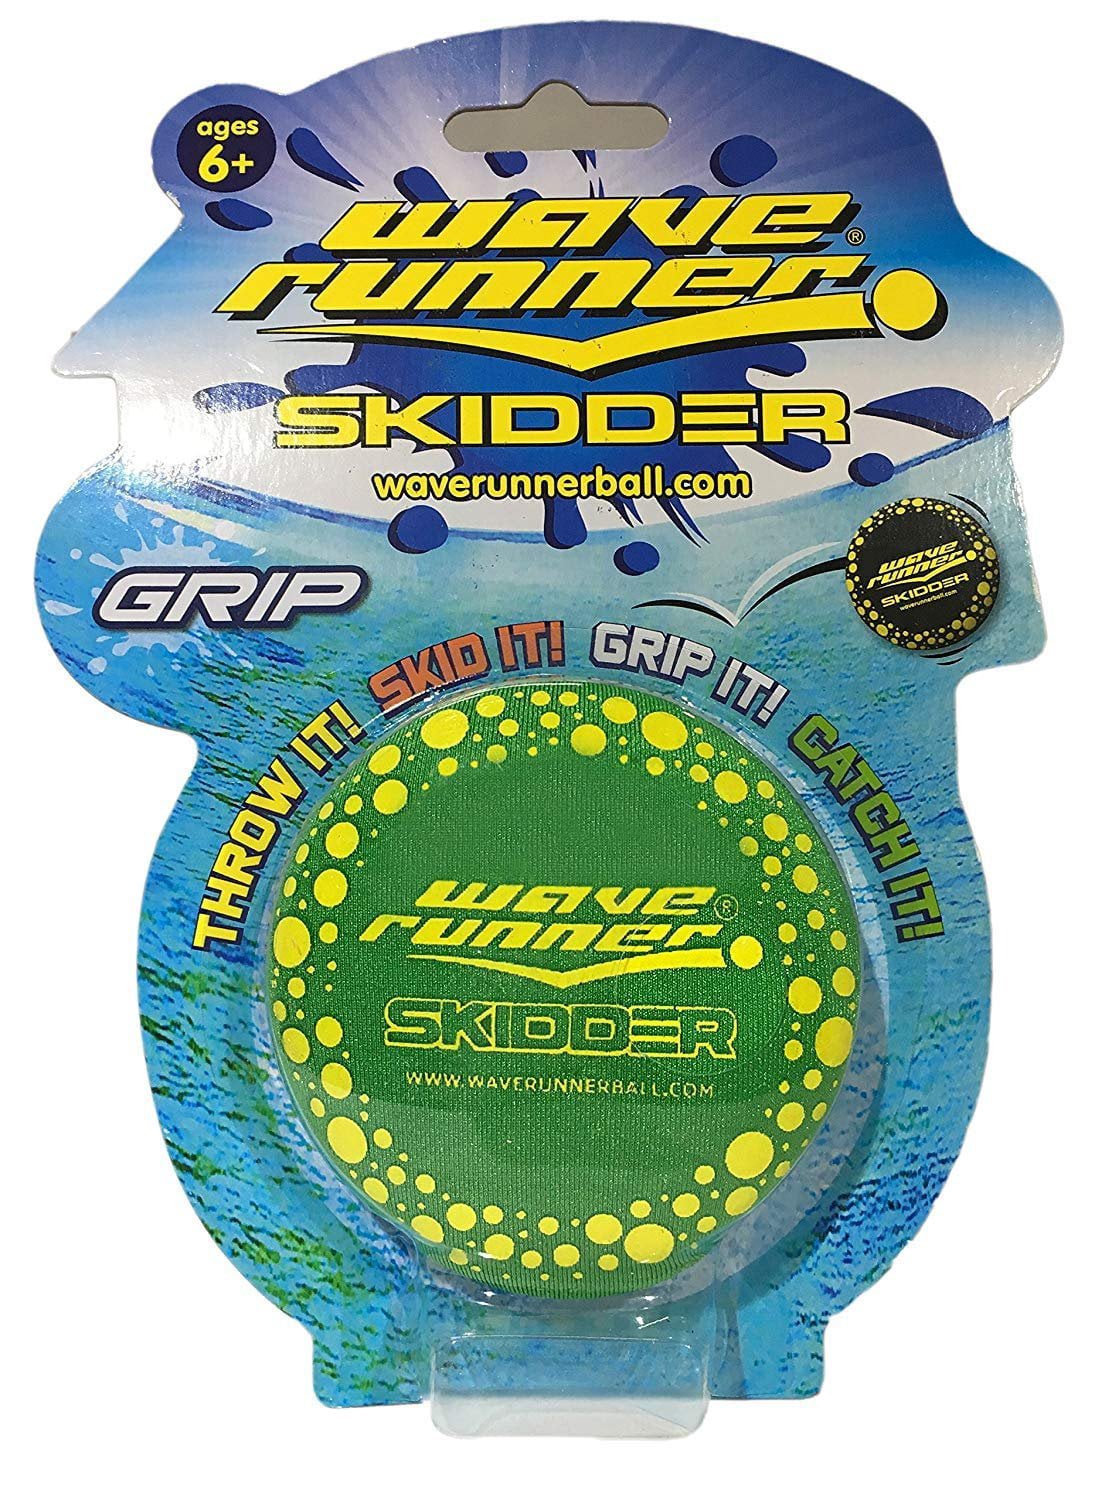 Pool/Beach Wave Runner Skidder #1 Water Ball For Skipping and Bouncing 